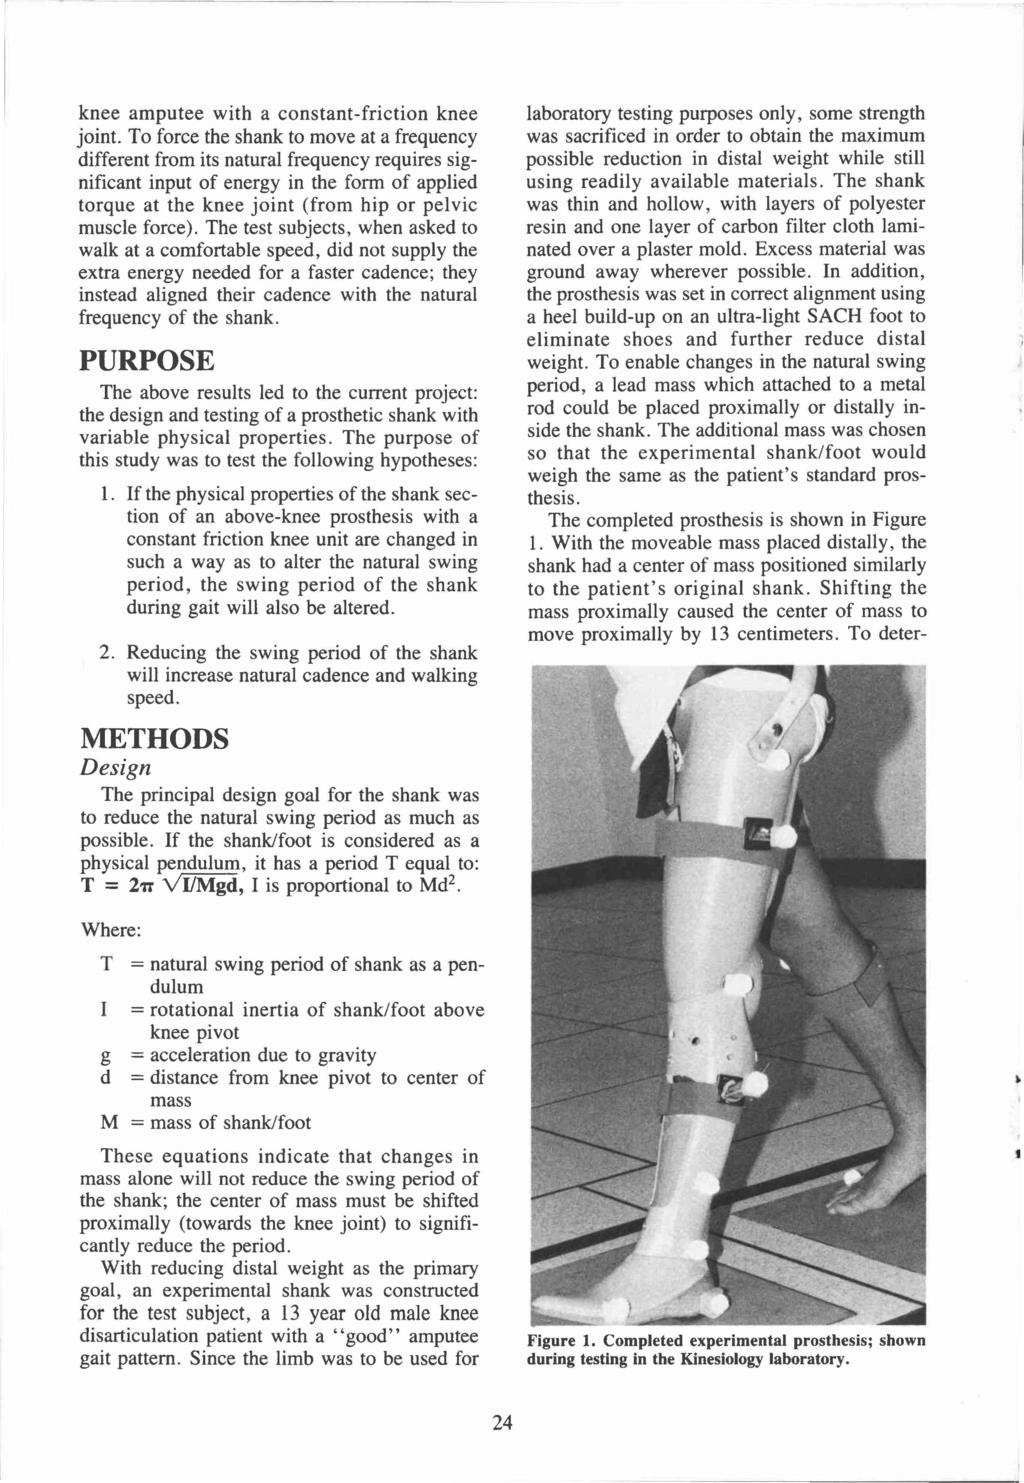 knee amputee with a constant-friction knee joint.